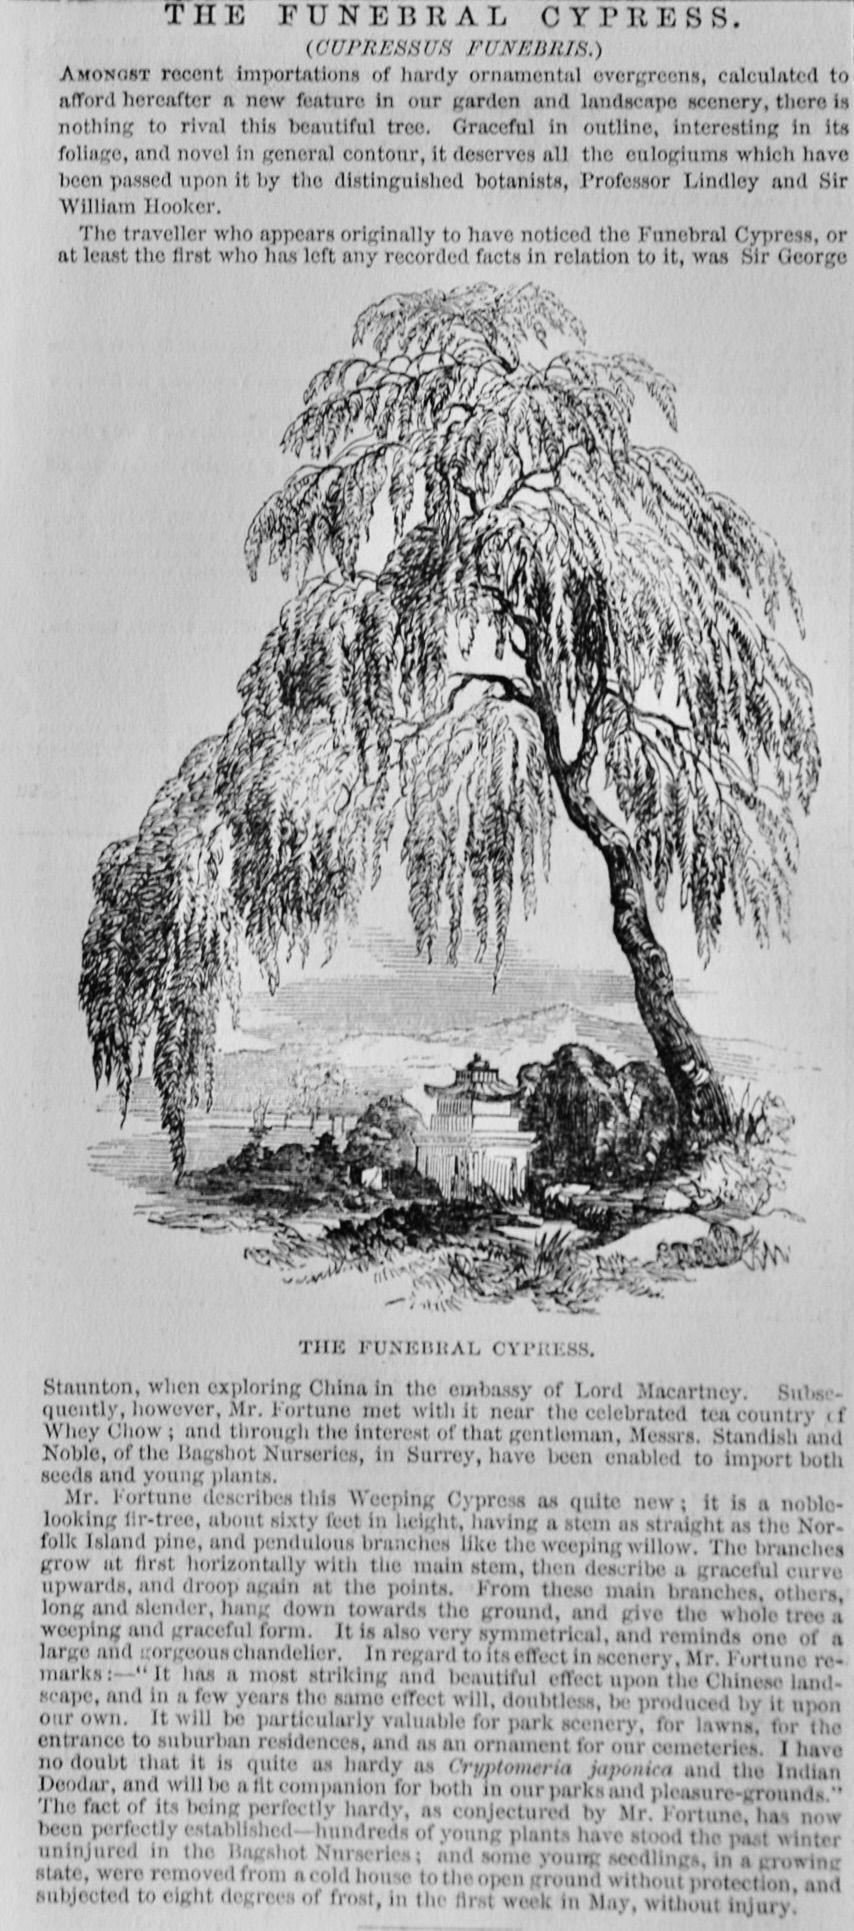 The Funeral Cypress. 1850.